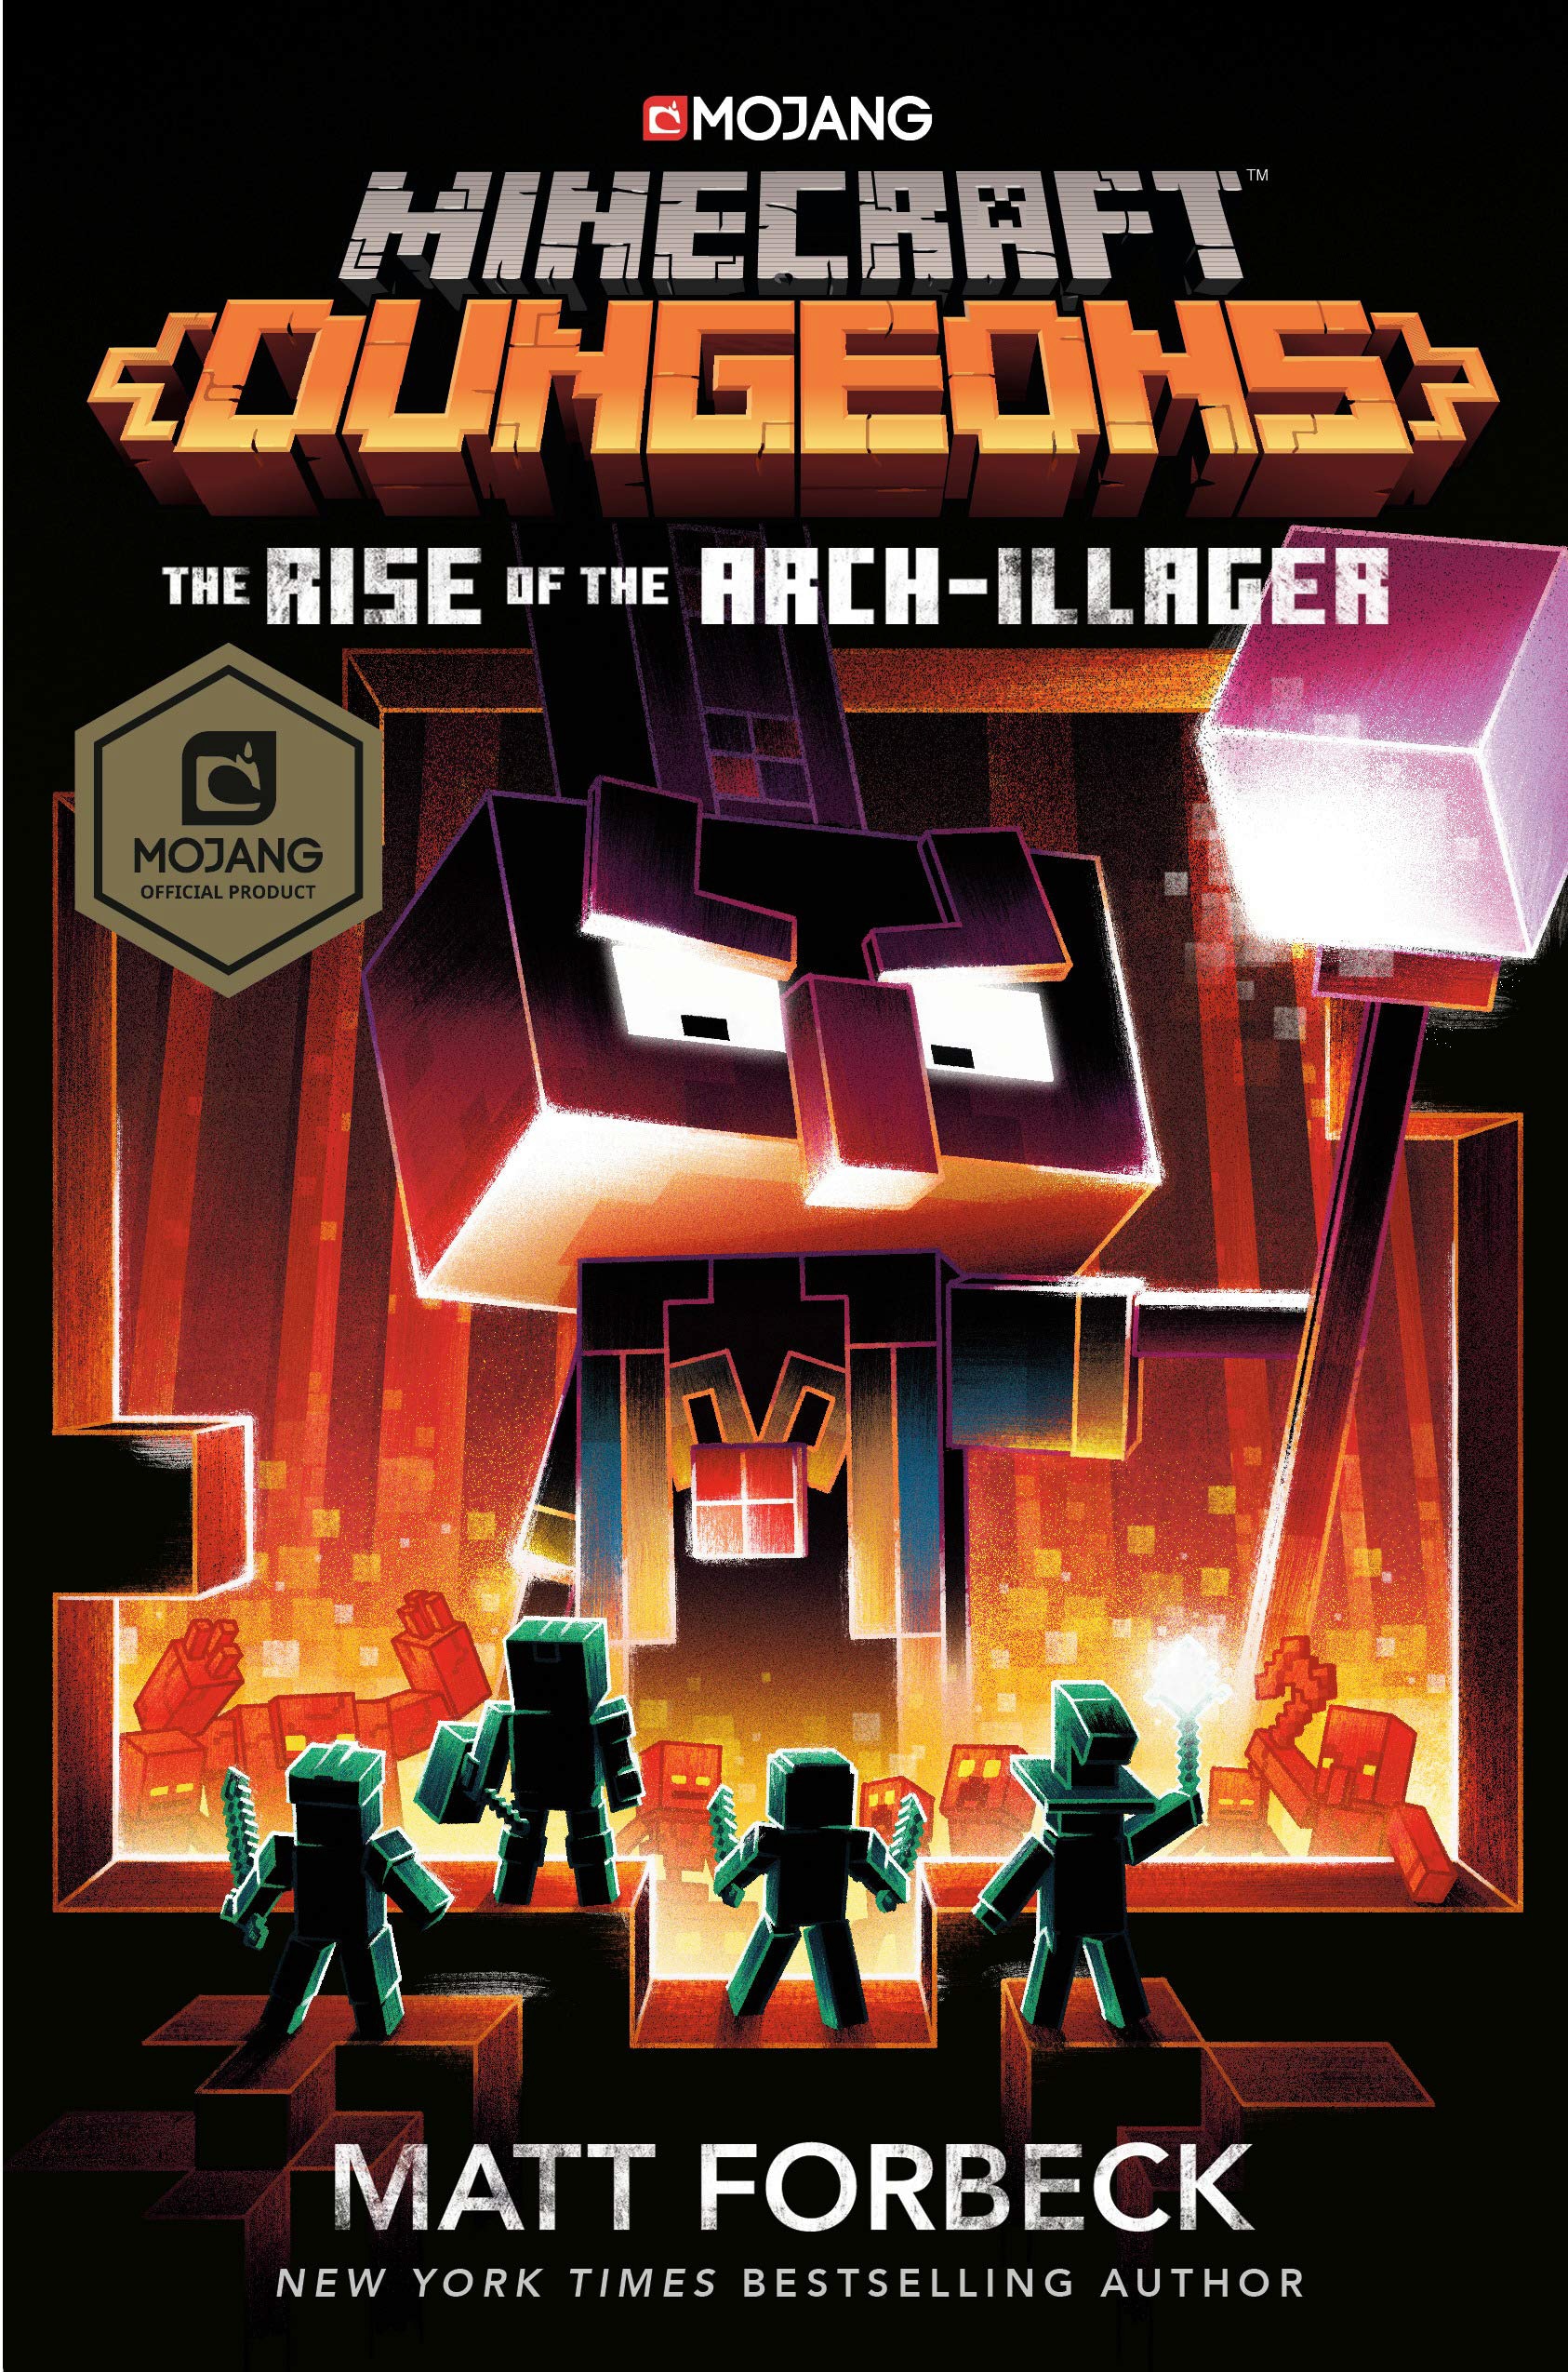 Book “Minecraft Dungeons: Rise of the Arch-Illager” by Matt Forbeck — July 9, 2020